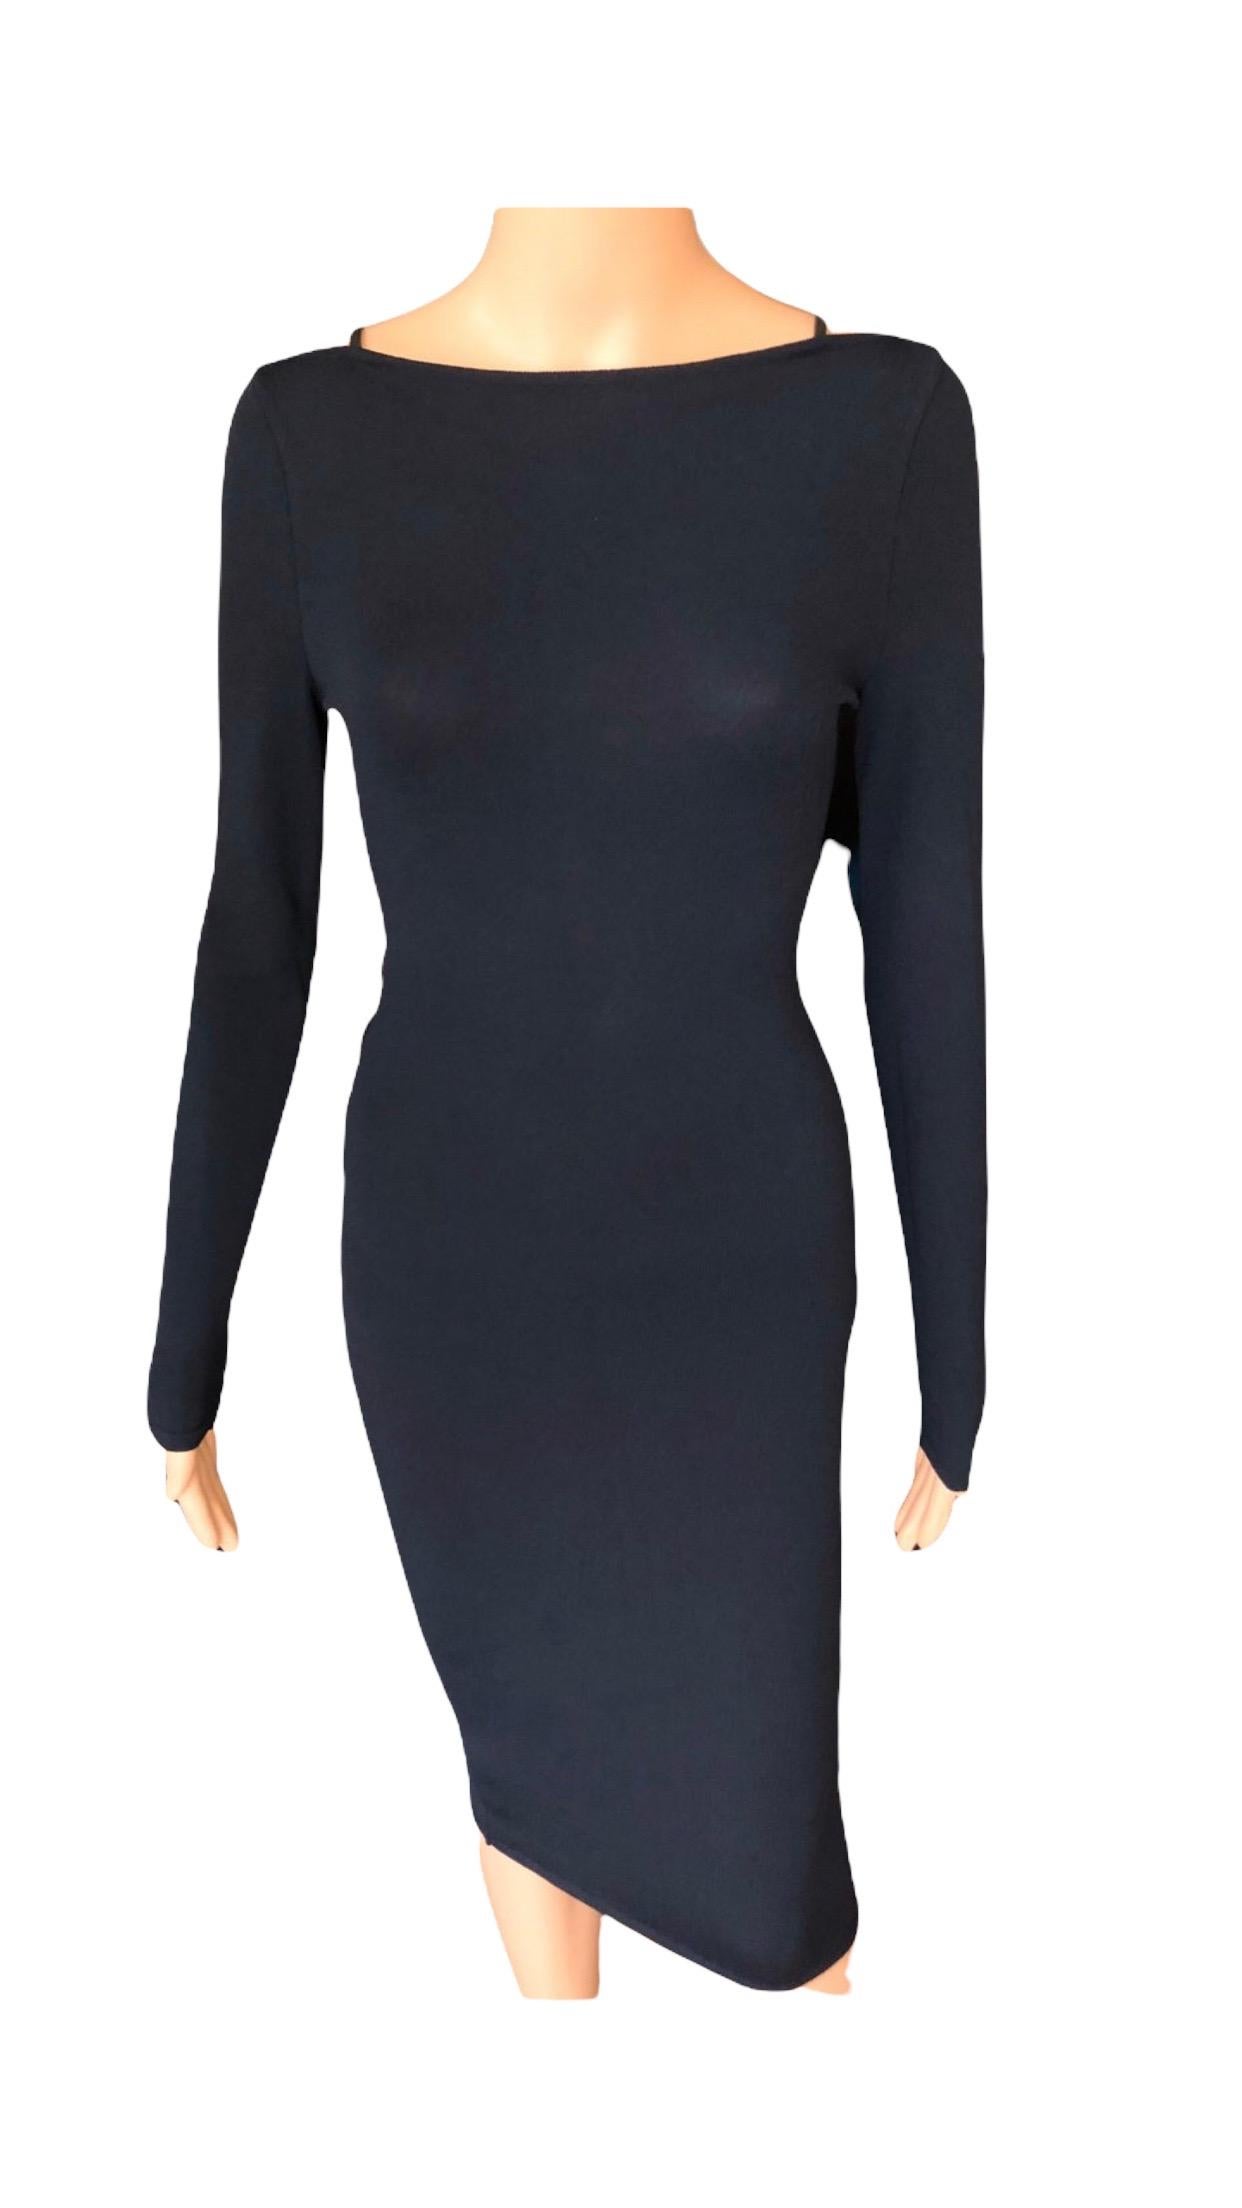 Tom Ford for Gucci S/S 1998 Vintage Bodycon Knit Midi Dress 2